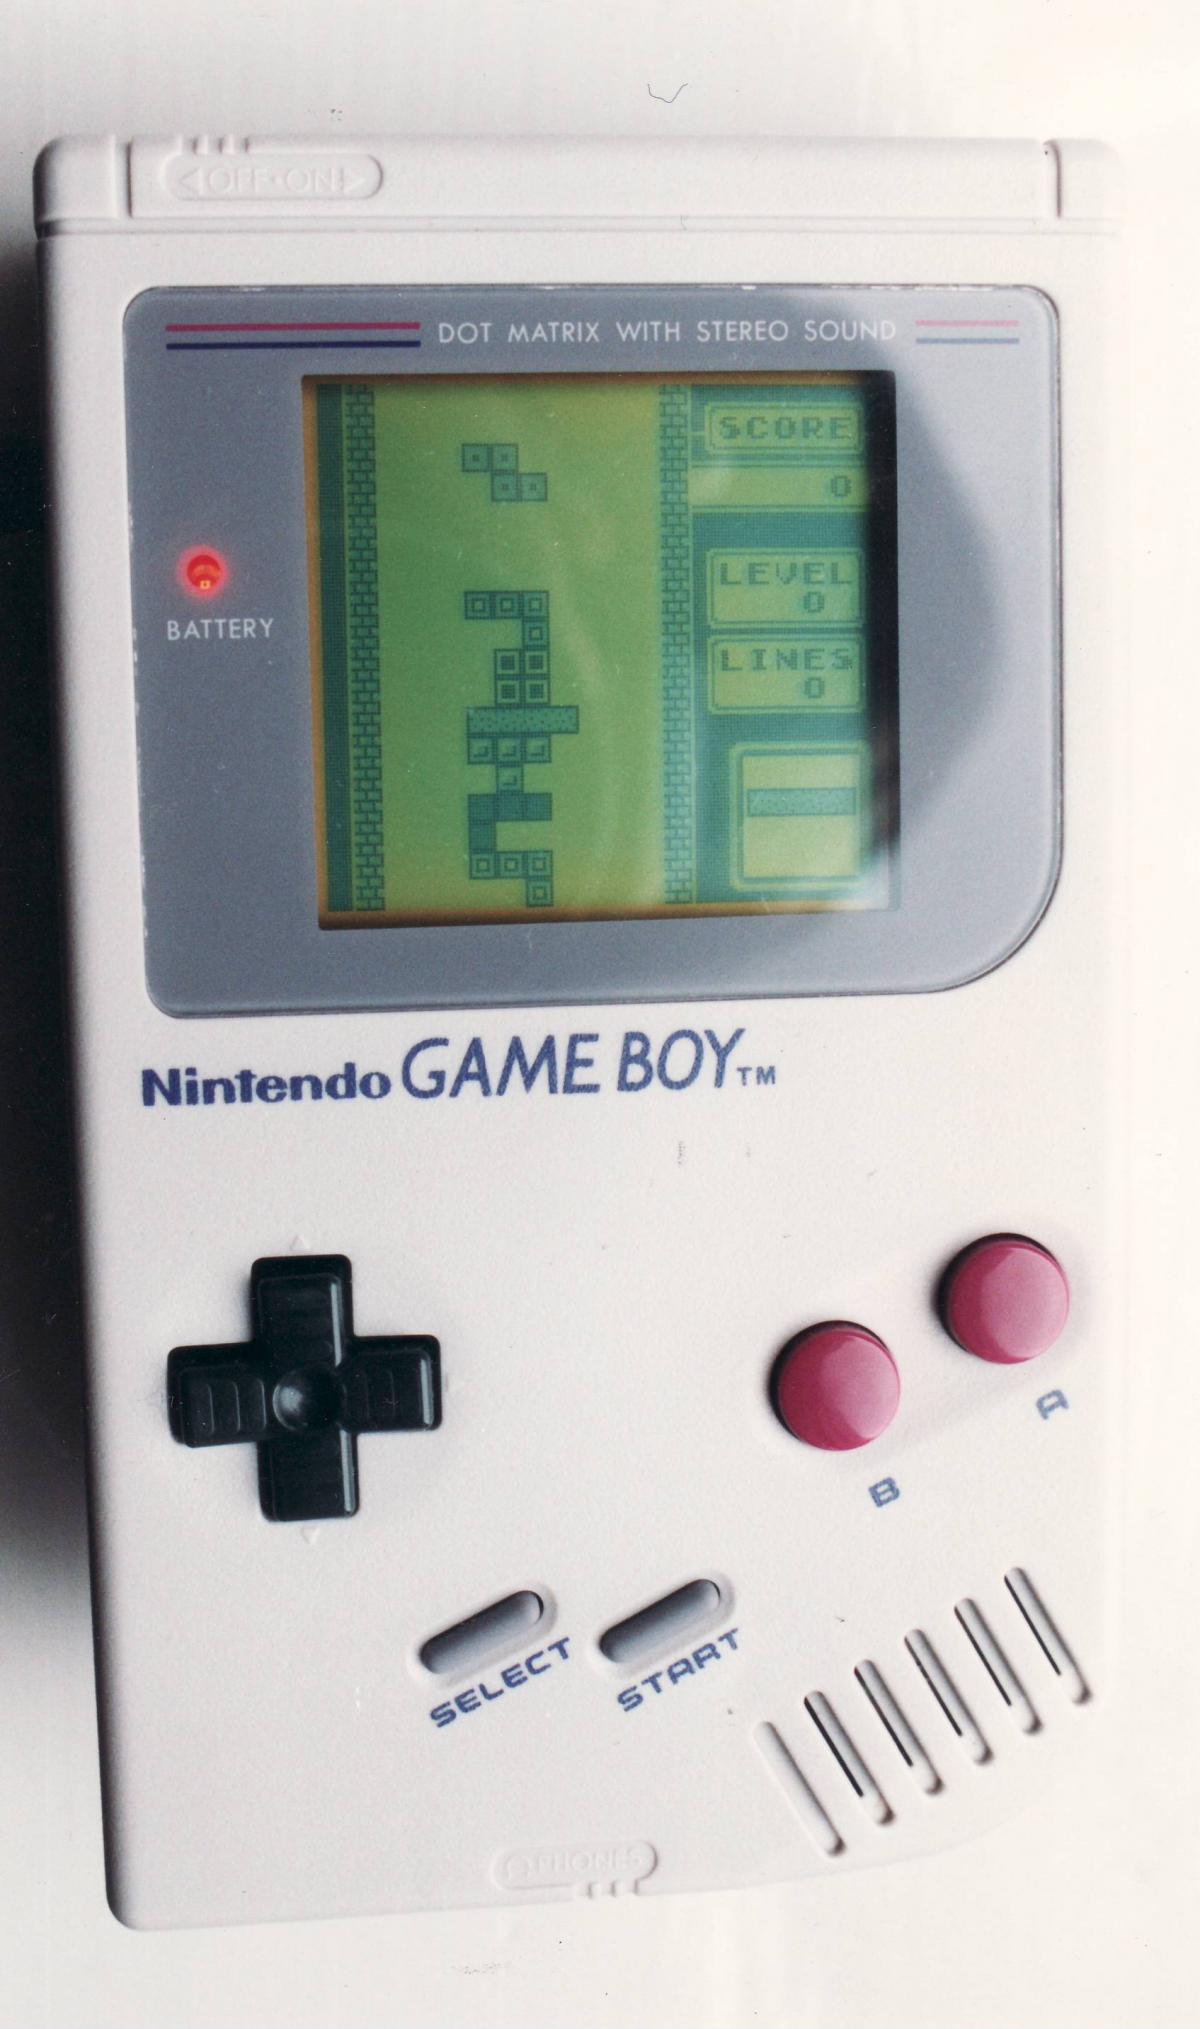 The Nintendo Gameboy and Tetris. Two all-time classics.